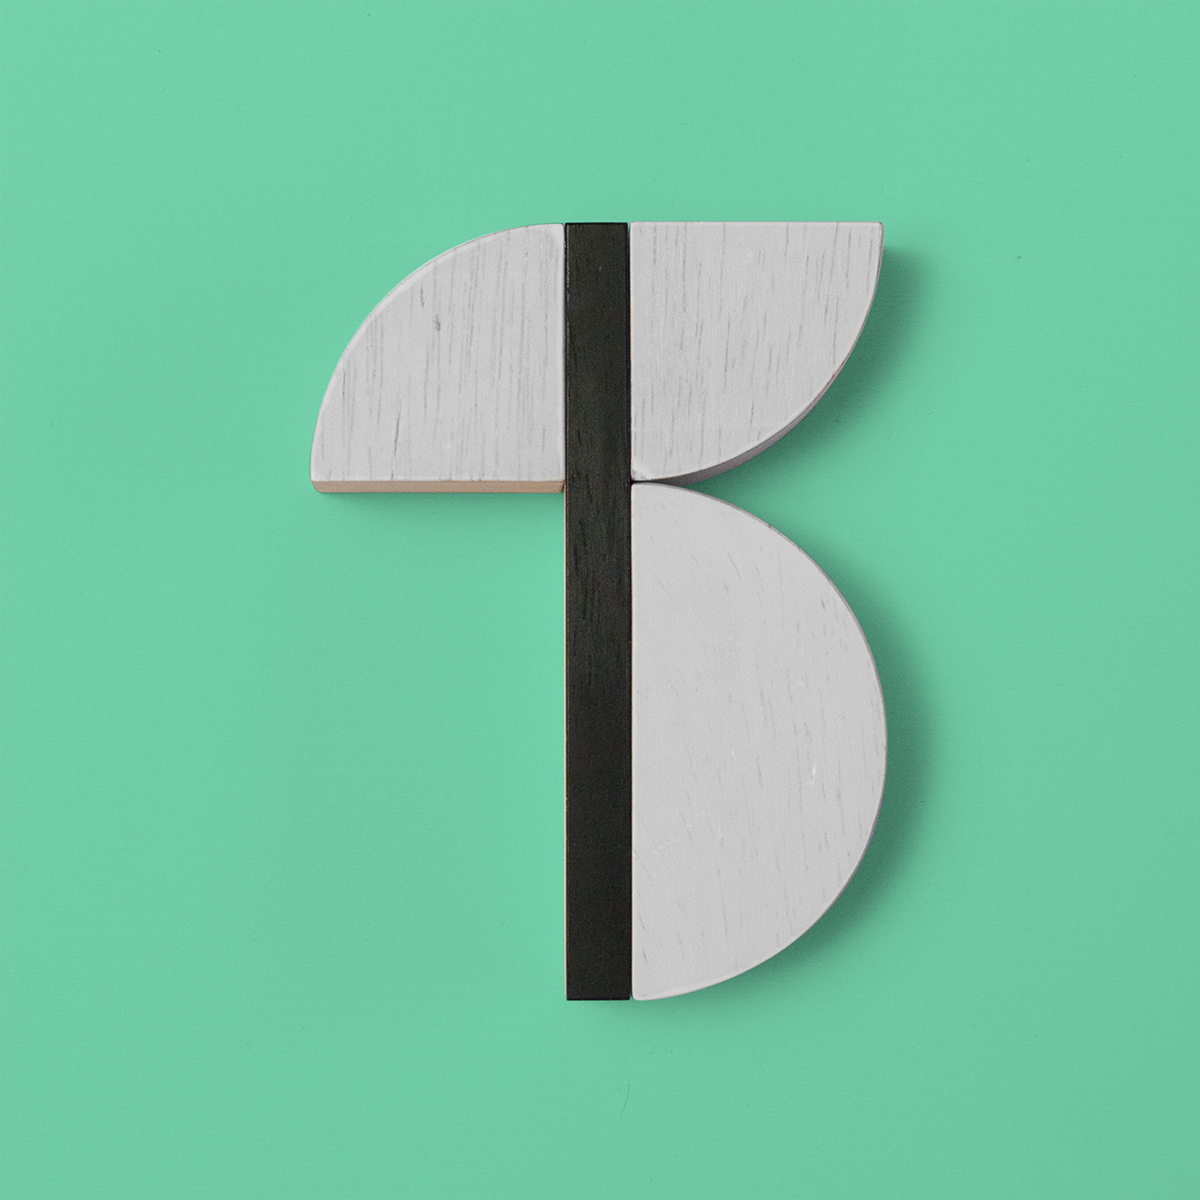 type 36daysoftype dosdecadatres tipografia wood lettering wooden geometric flat design Basic madrid numbers letters Playful